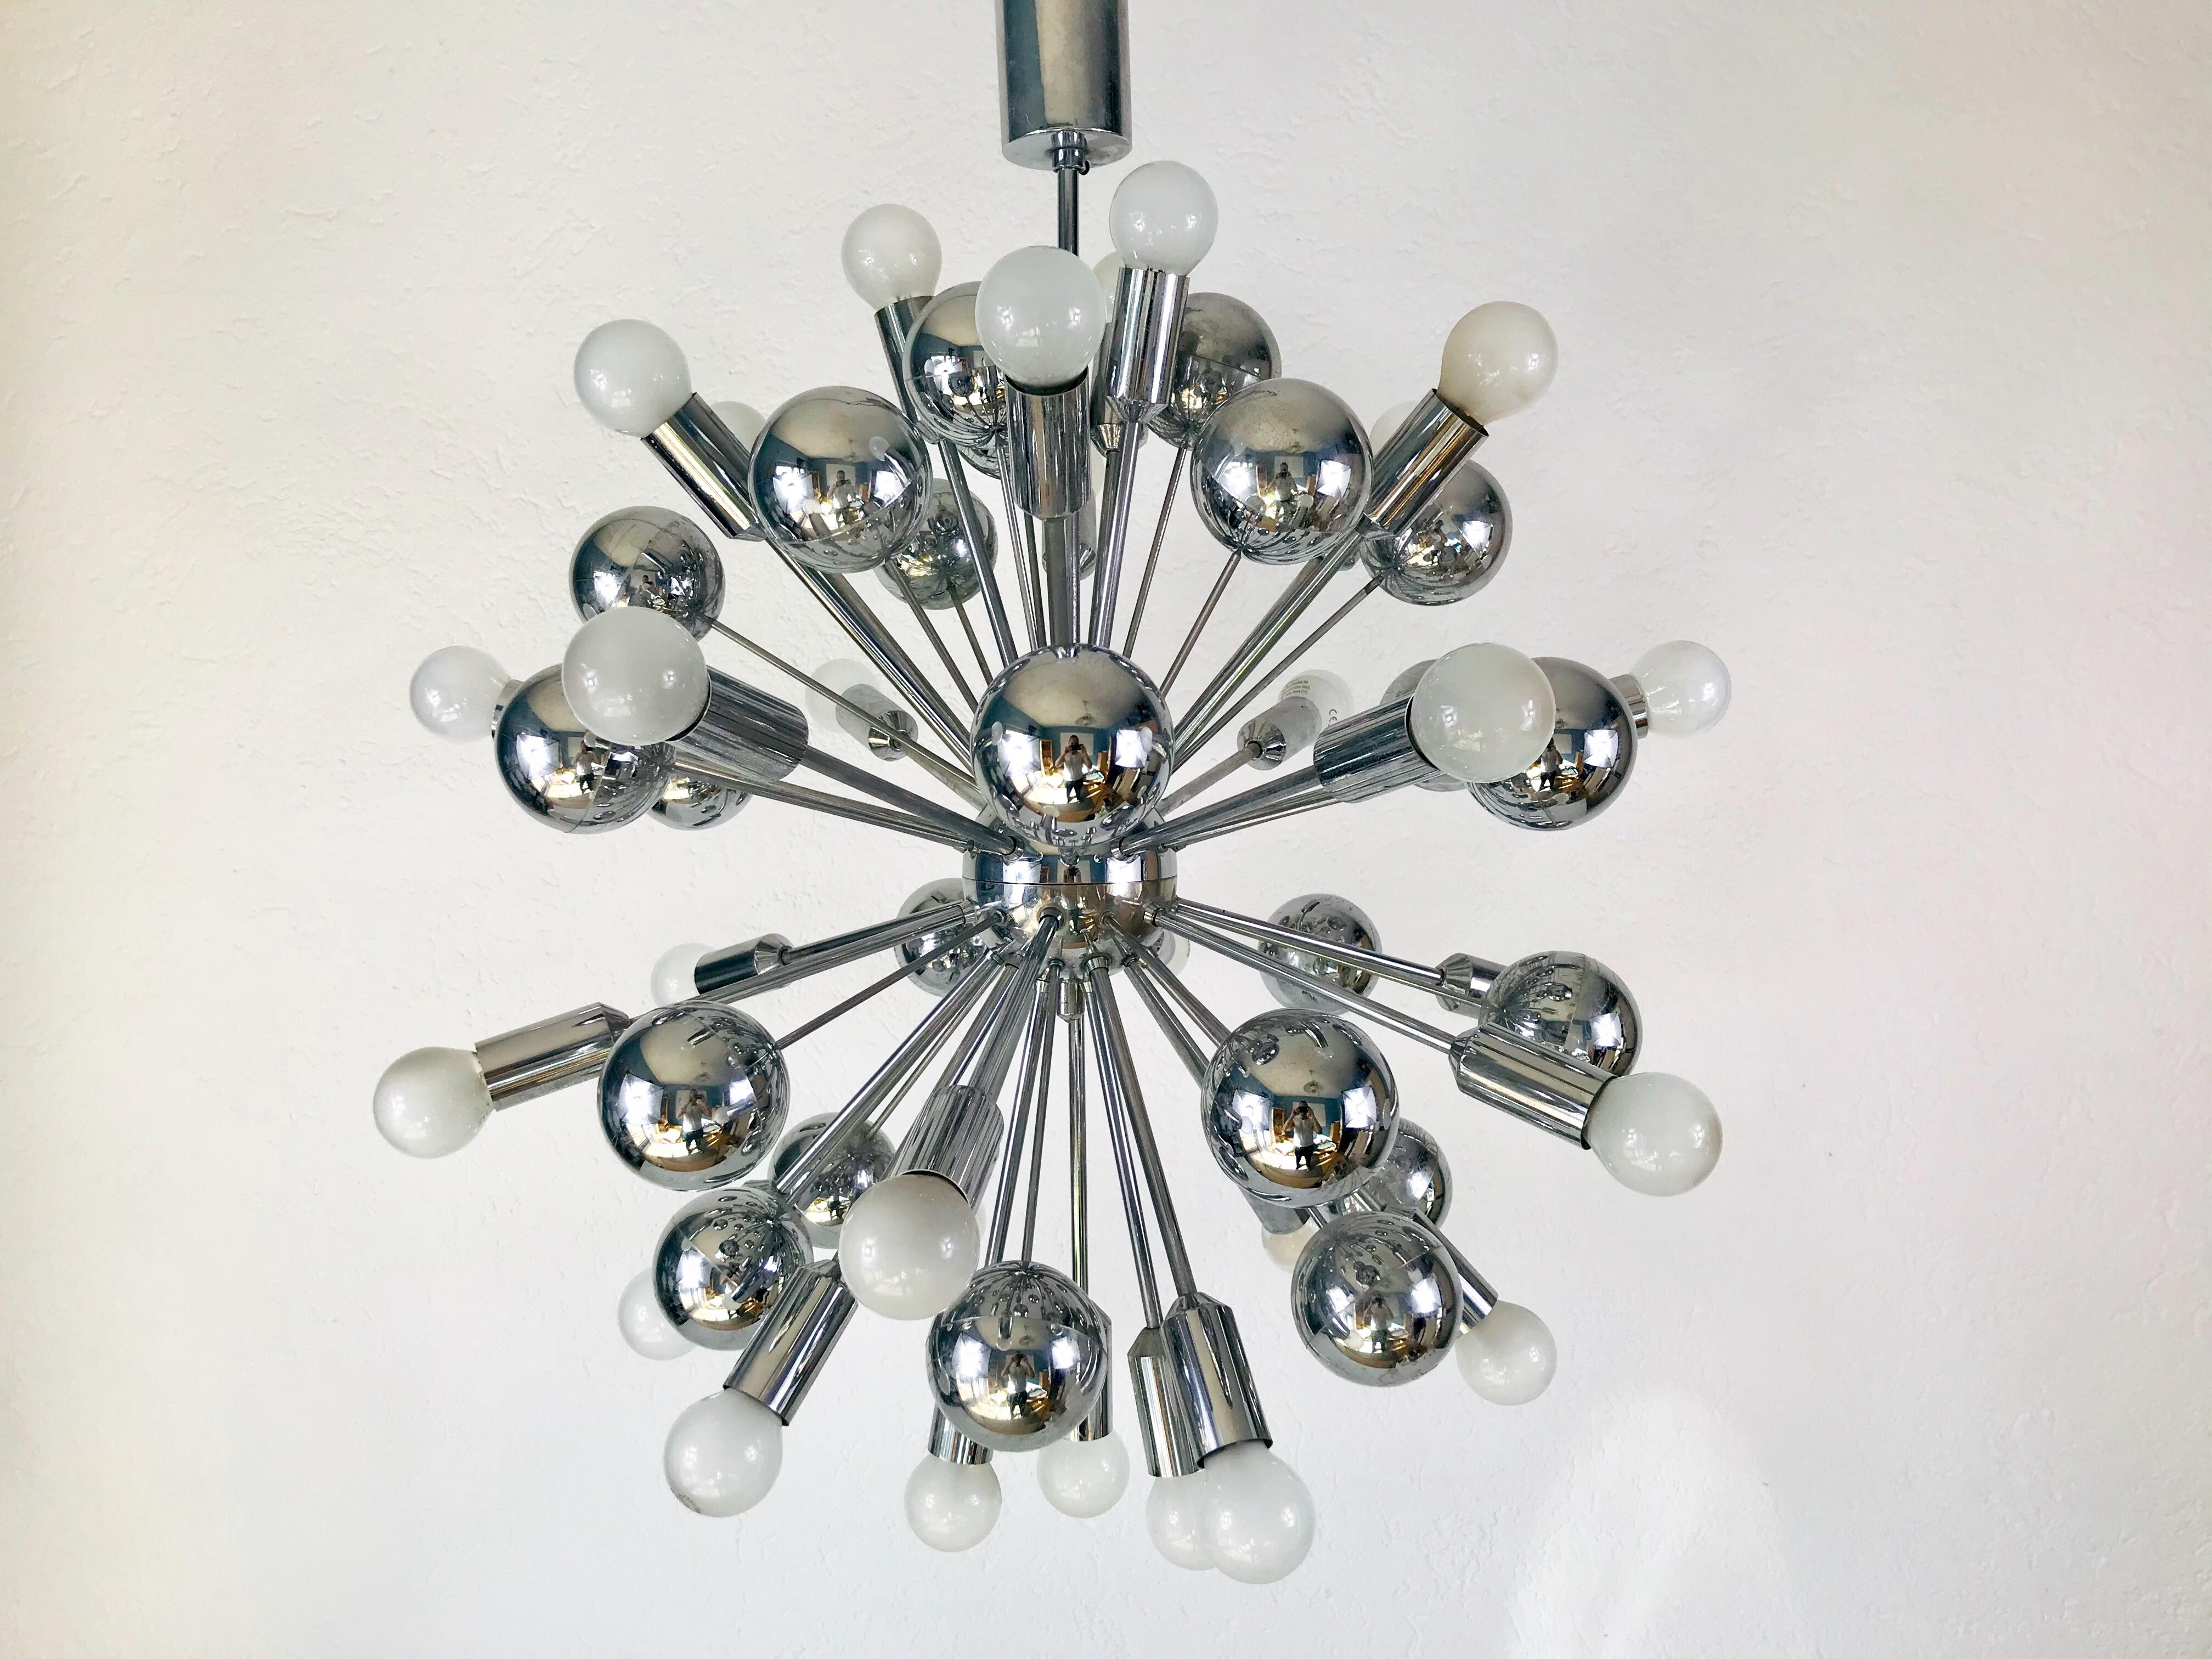 A chrome Sputnik chandelier made in Germany in the 1960s. It is fascinating with its Space Age design and many arms. The body of the light is made of chrome metal, including the arms. 

The light requires E14 light bulbs. Good vintage condition,